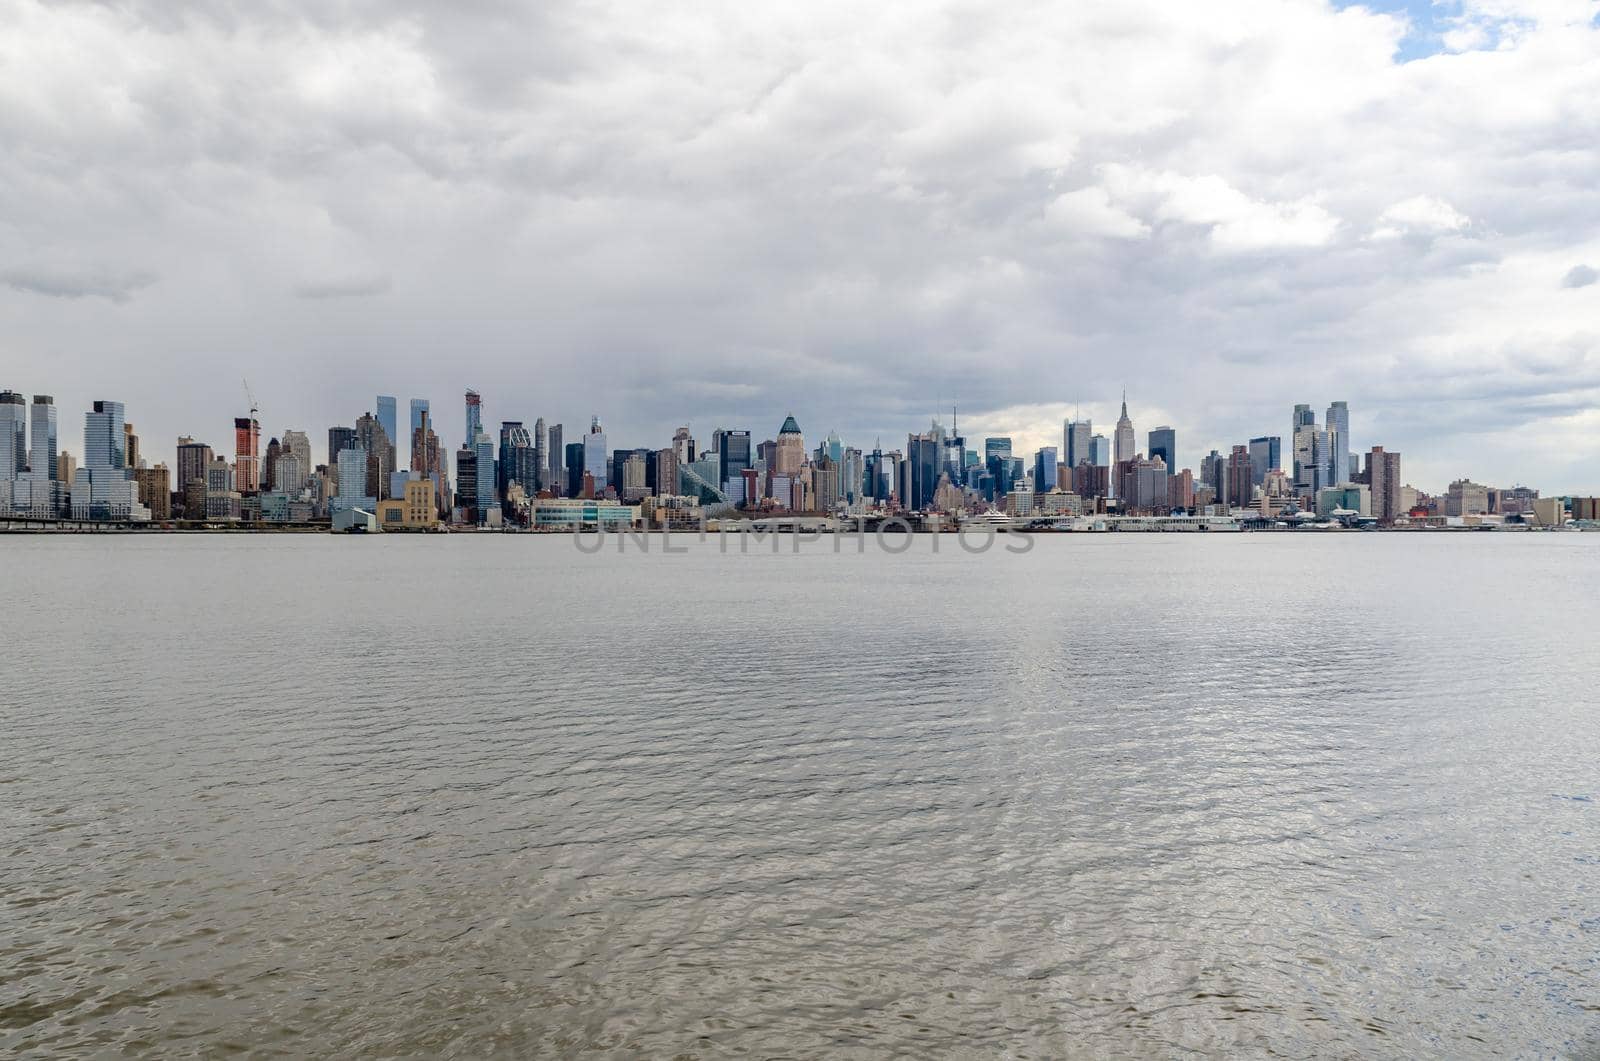 Wide angle shot of New York City Manhattan Skyline with Empire State Building and Hudson river in front during cloudy winter day, horizontal